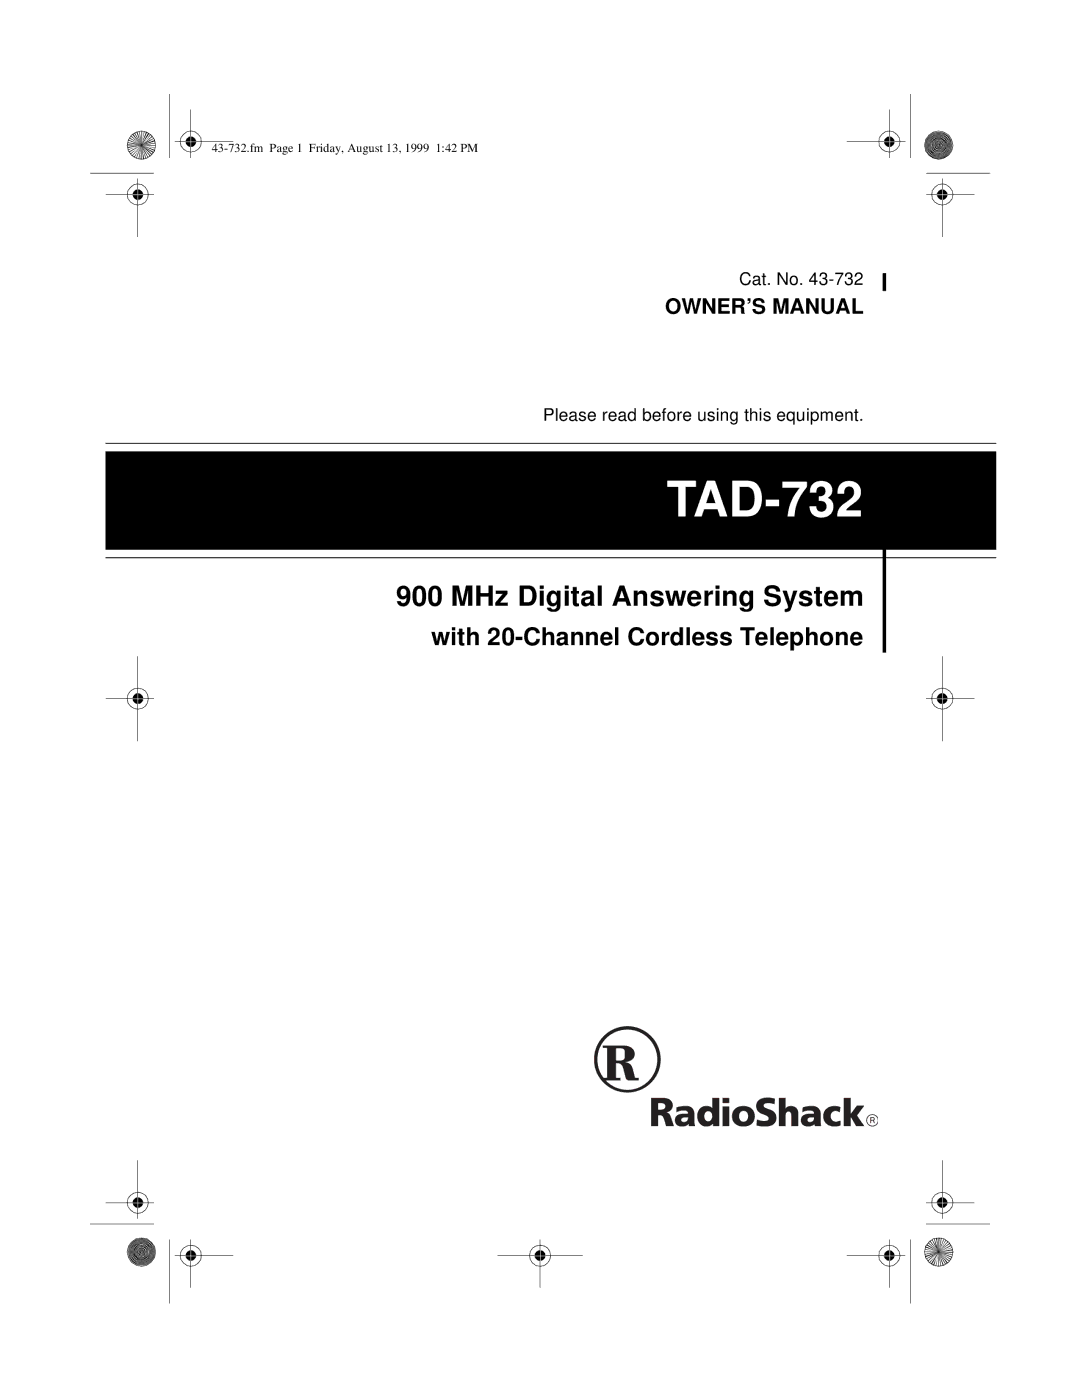 GE TAD-732 owner manual 